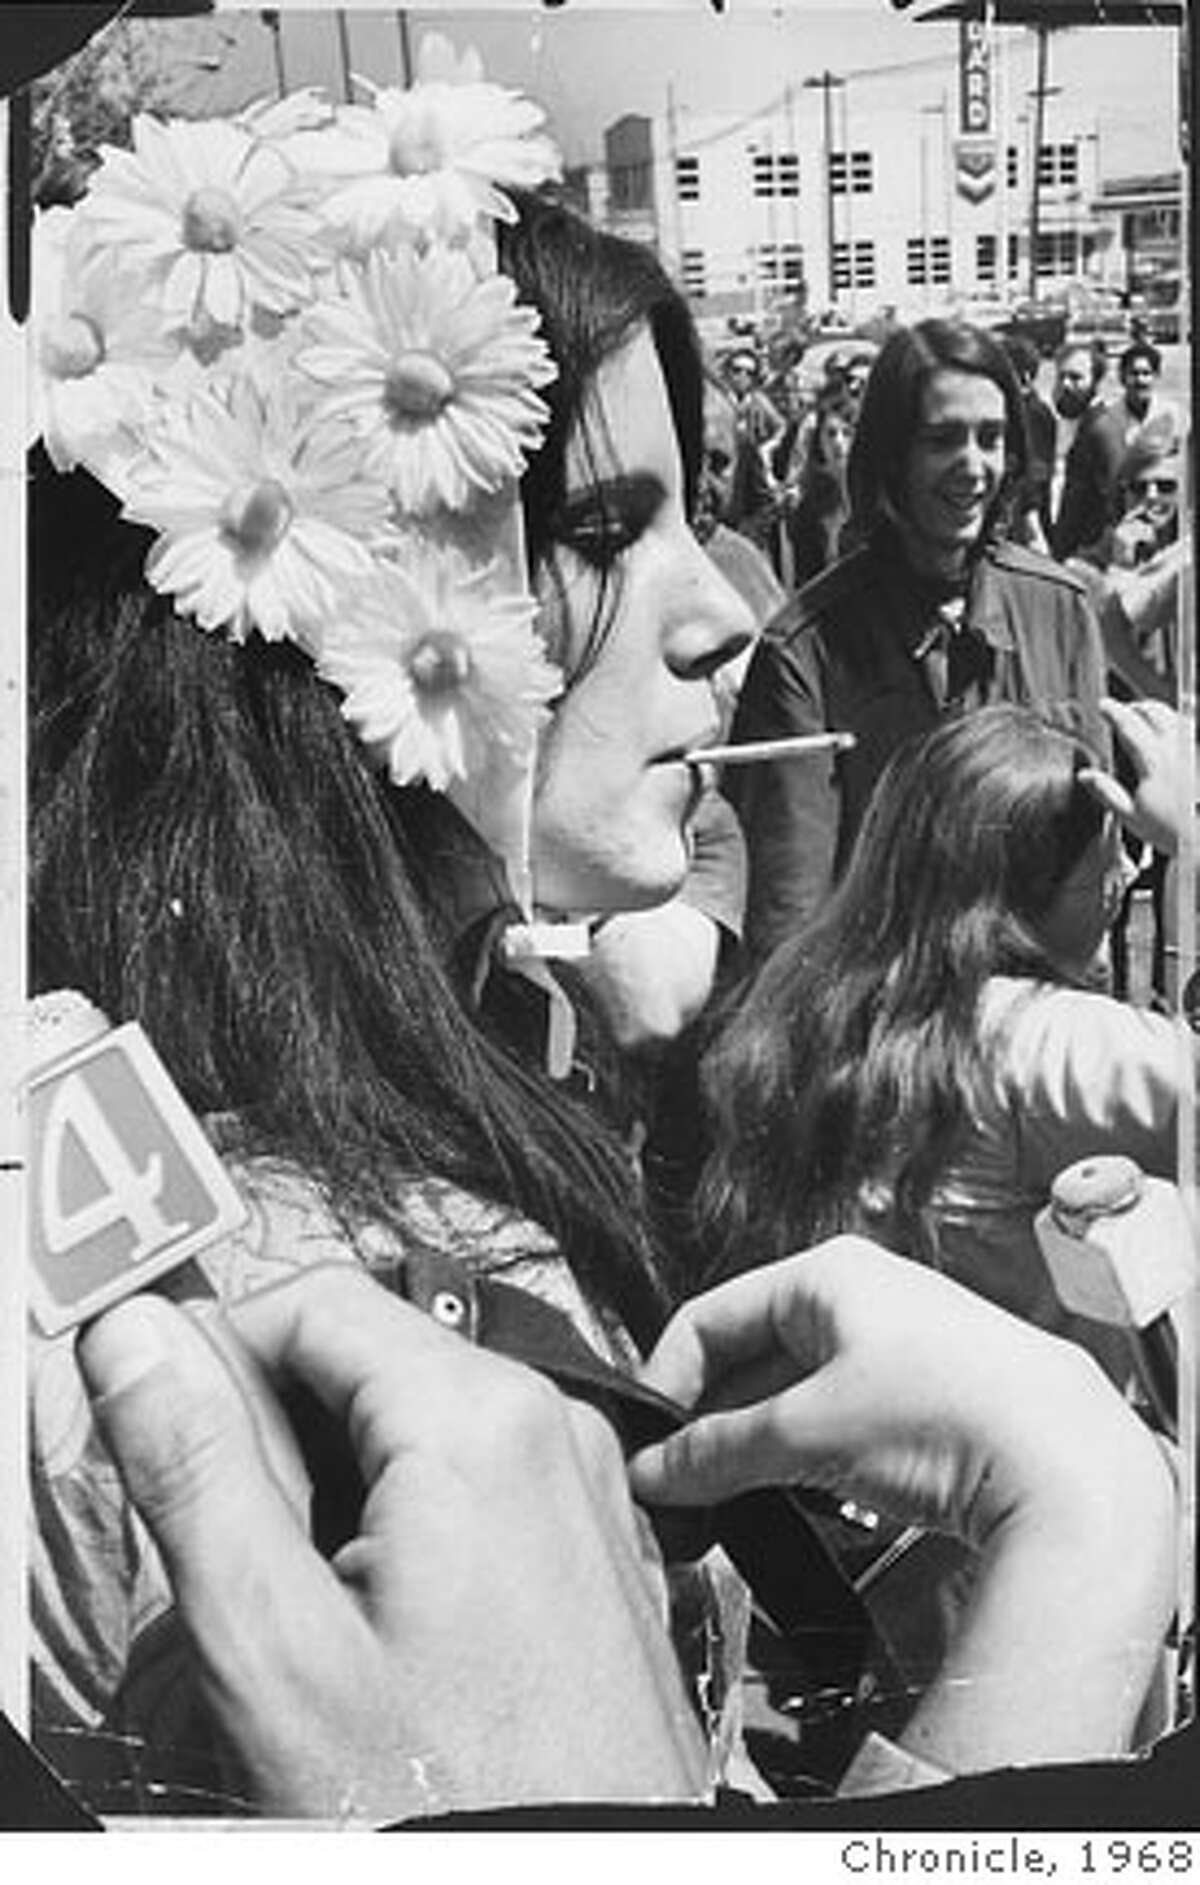 A flower girl named Paula who was wearing a hat of daisies opened a cigarette case. "Anybody want a joint?" she asked. The response was slow, so she tossed a dozen cigarettes into the crowd. Kathy Brady , 18, and Ralph Braun agreed that Bergess is a "wonderful person." Beat Hippies S.F. April 15, 1968